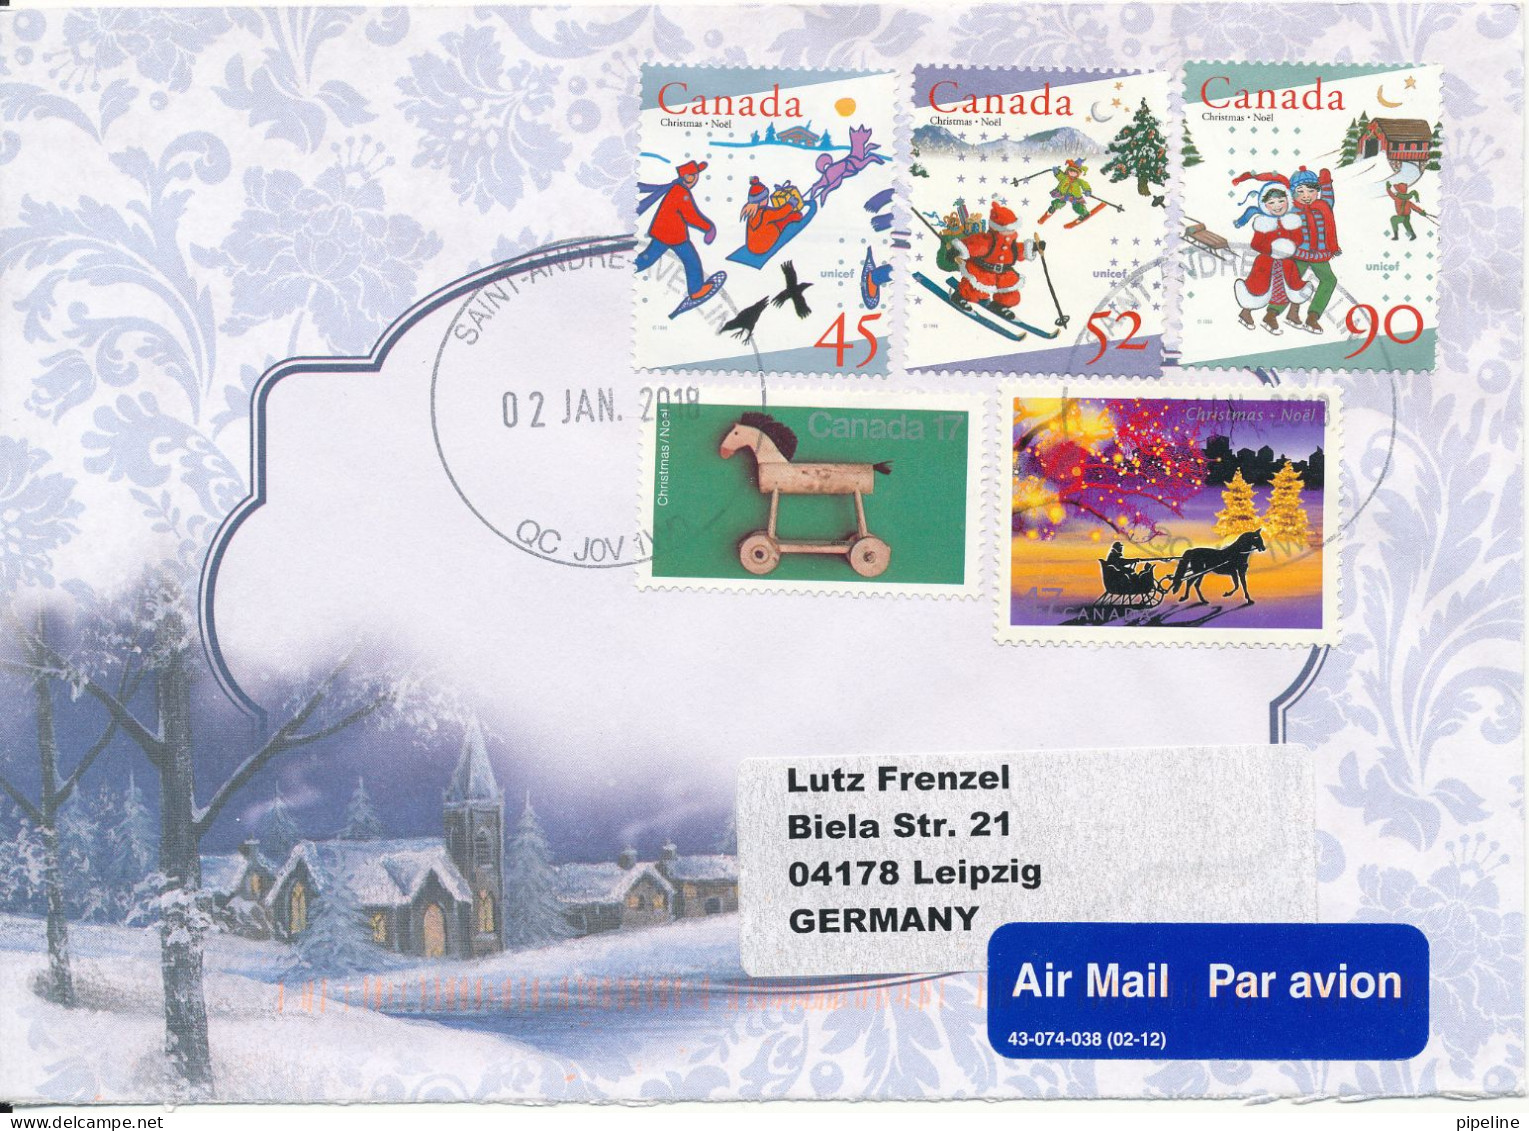 Canada Cover Sent Air Mail To Germany 2-1-2018 With More Christmas Stamps Very Nice Cover - Luchtpost